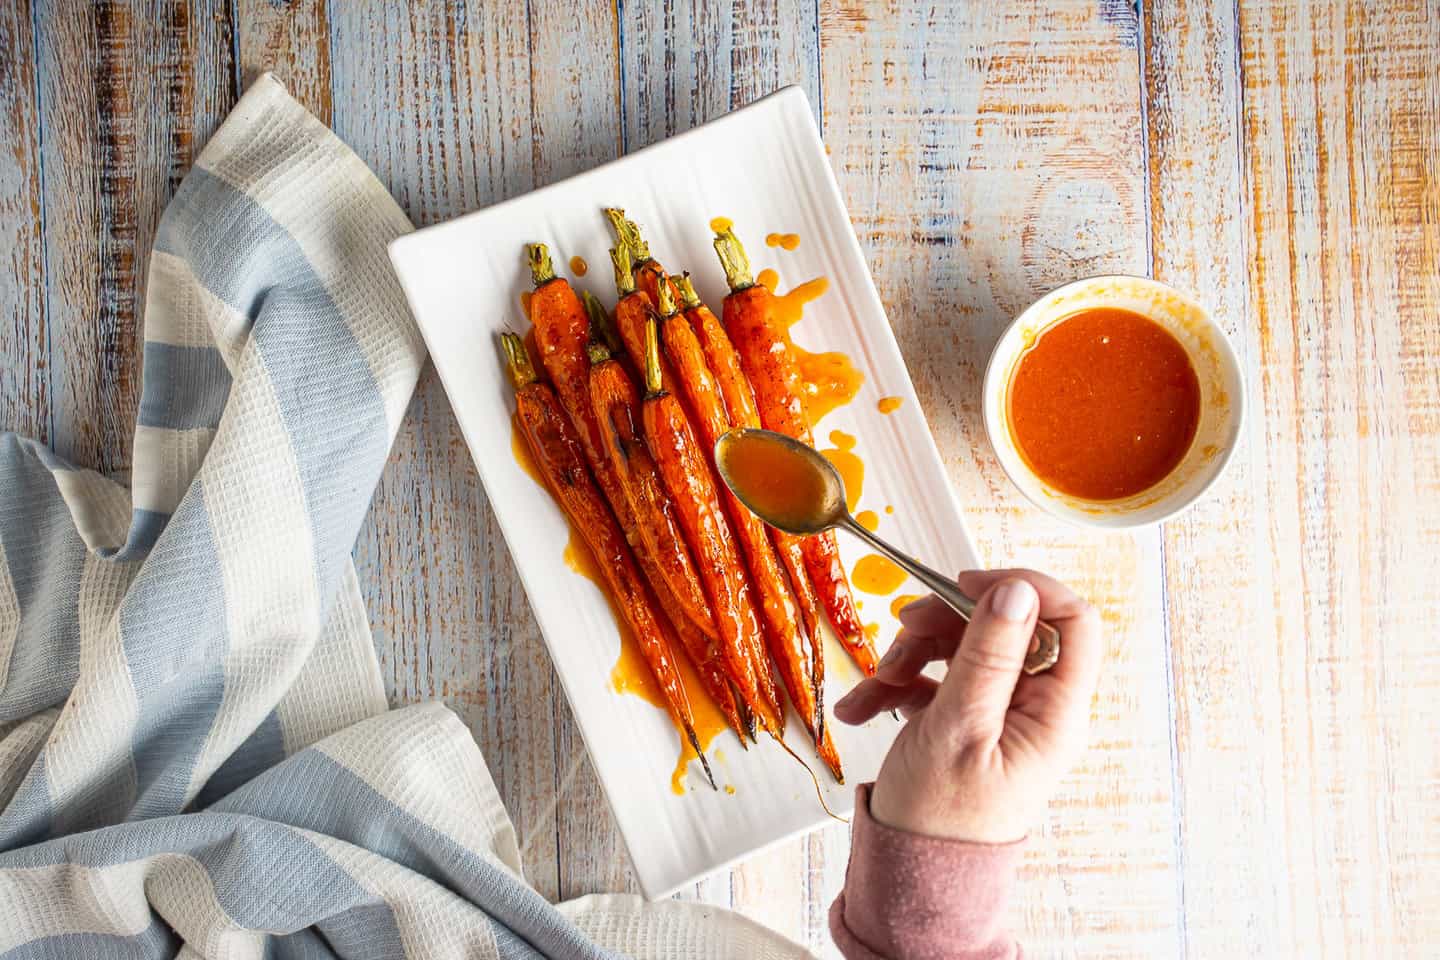 Drizzling a sweet and spicy glaze over roasted carrots.